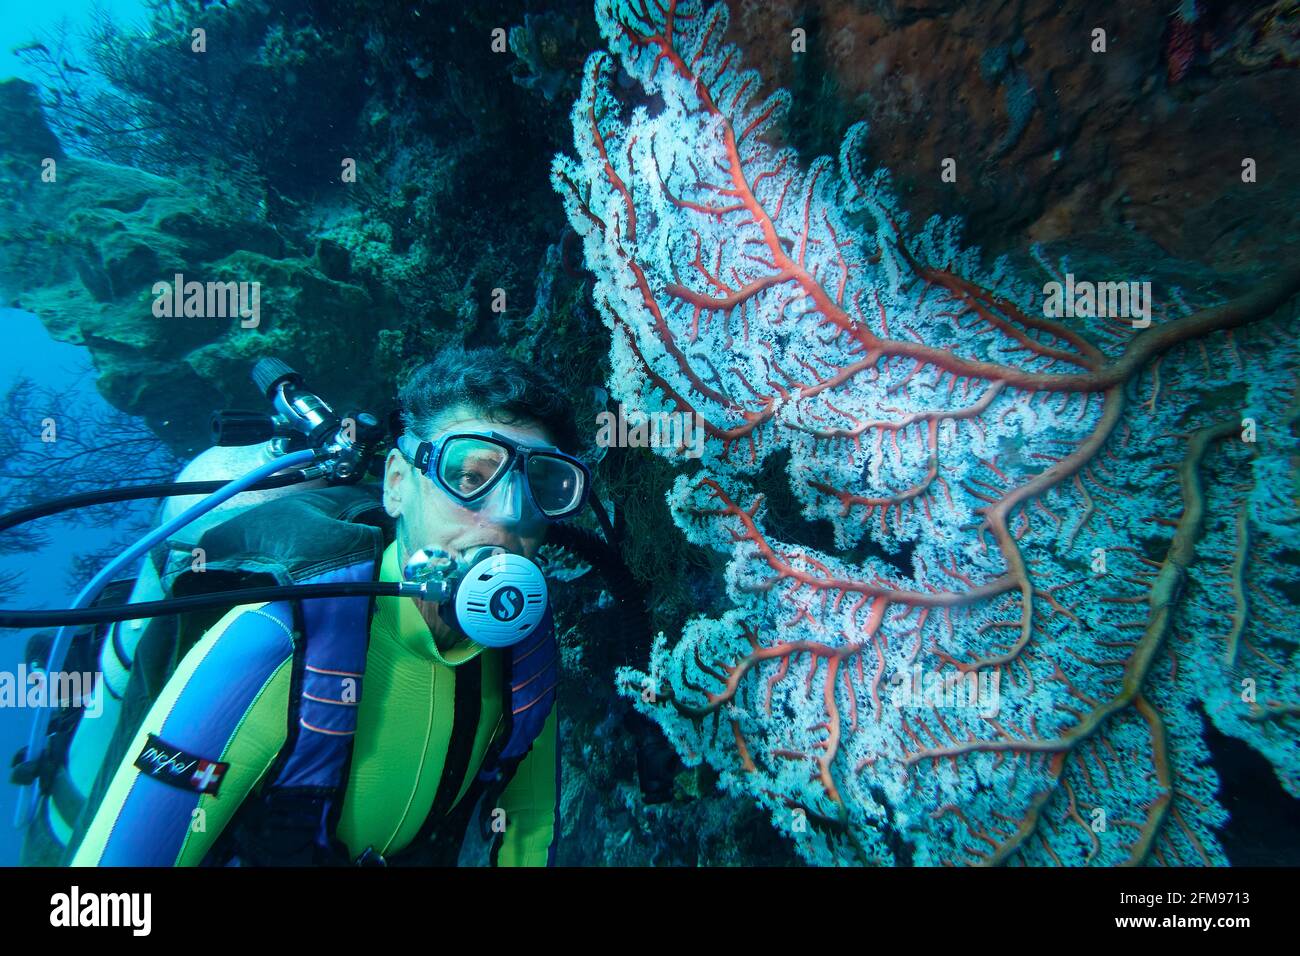 Female Diver Looks At Red Gorgonians With White Polyps. Selayar, South Sulawesi, Indonesia Stock Photo